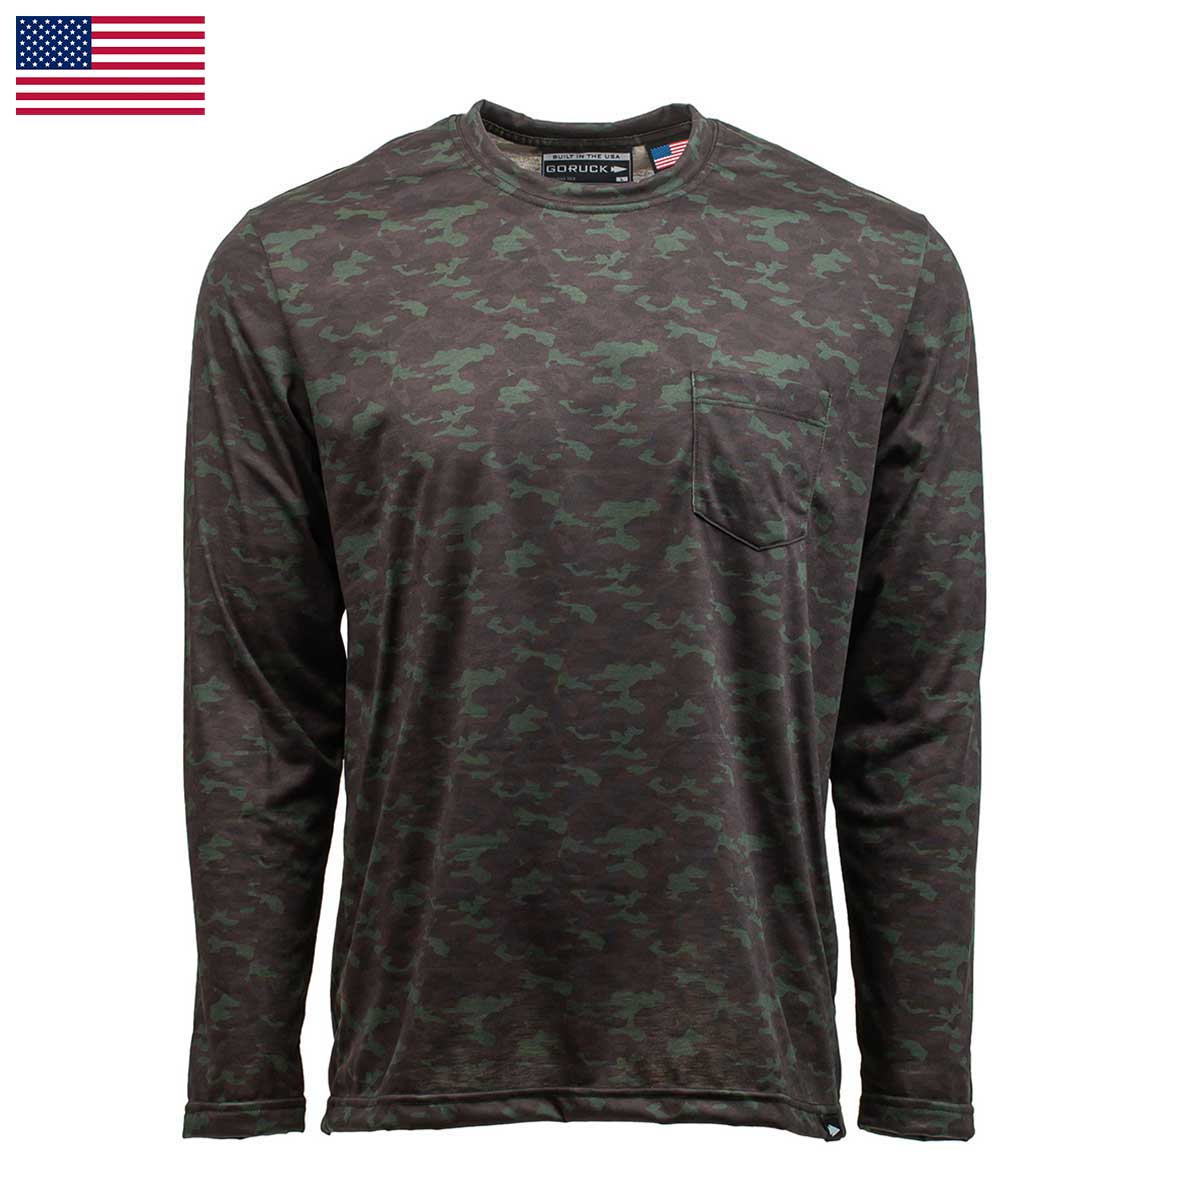 dark camo long sleeve shirt made in the united states of america